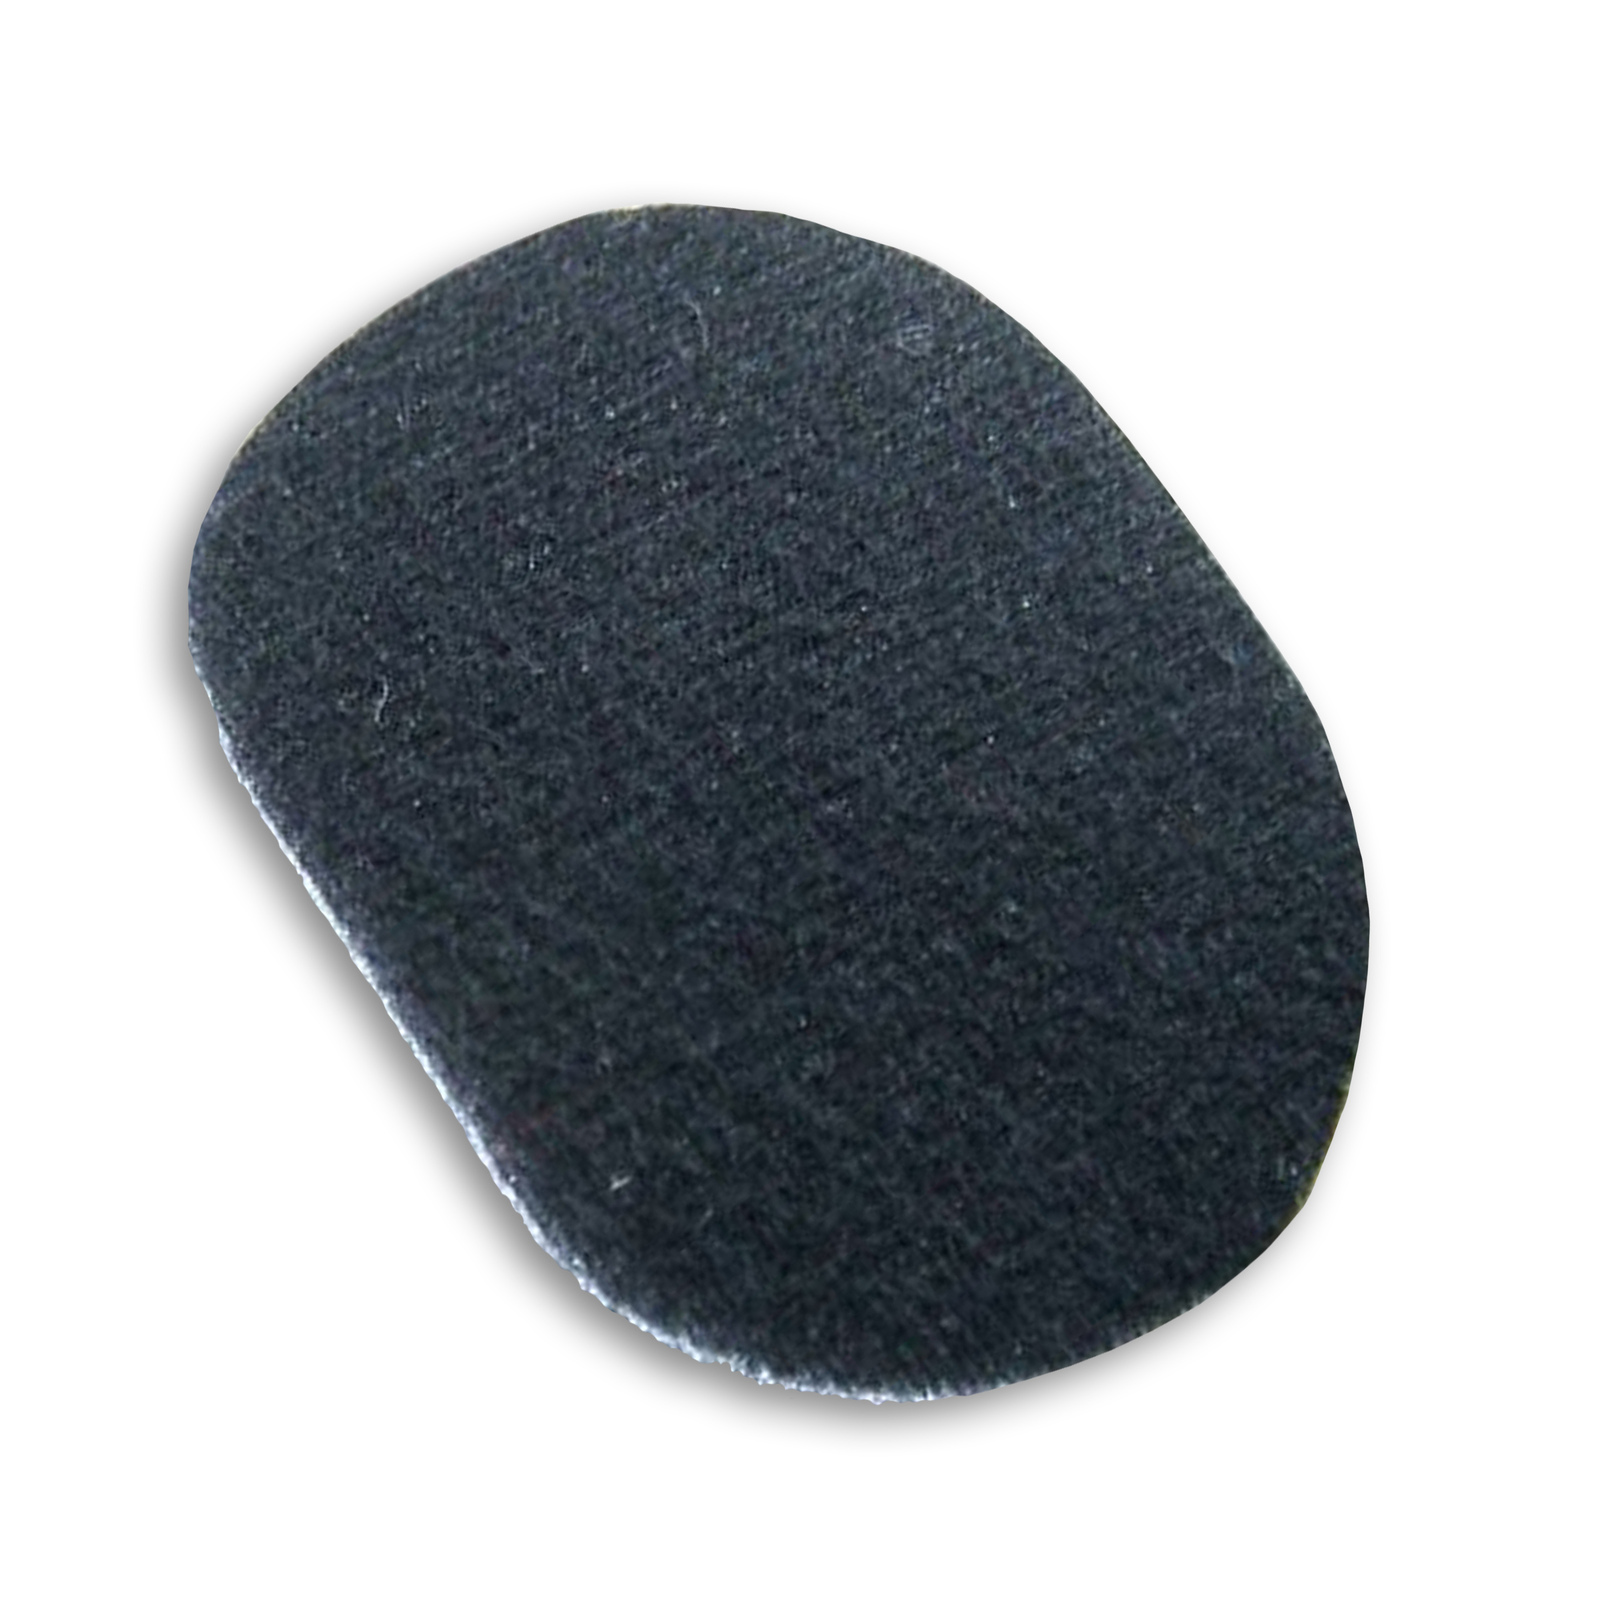 David Clark Dome Filter for H10 Series Headsets